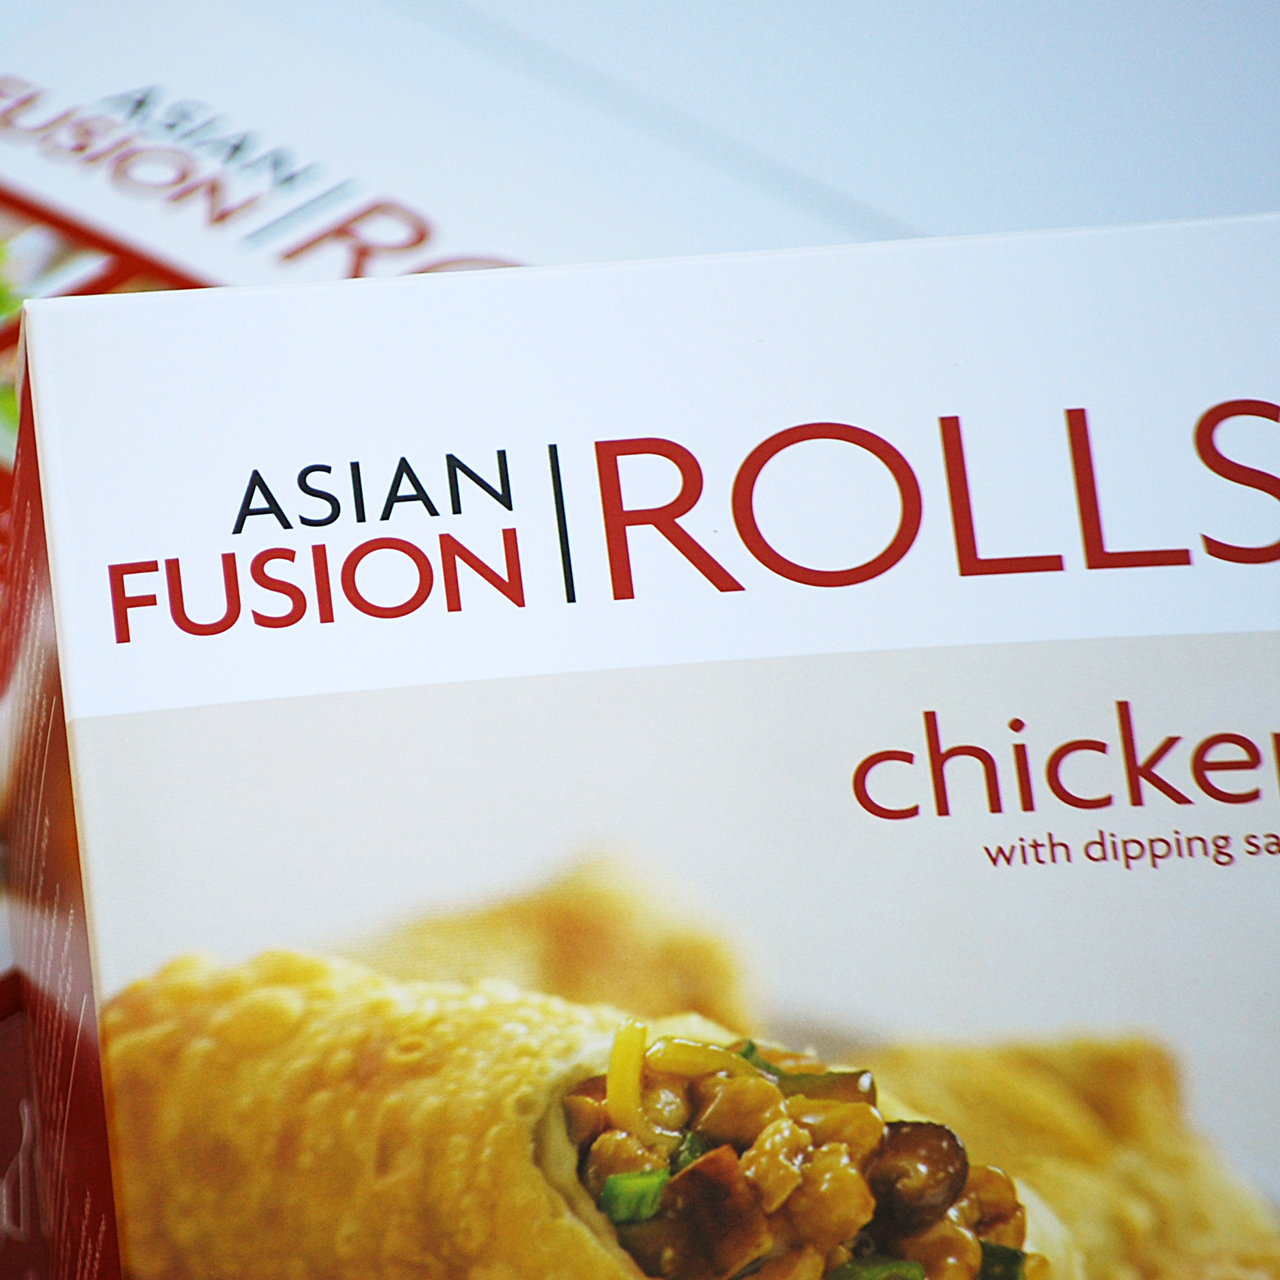 Masthead design for Van's Kitchen Asian Fusion Roll's package design